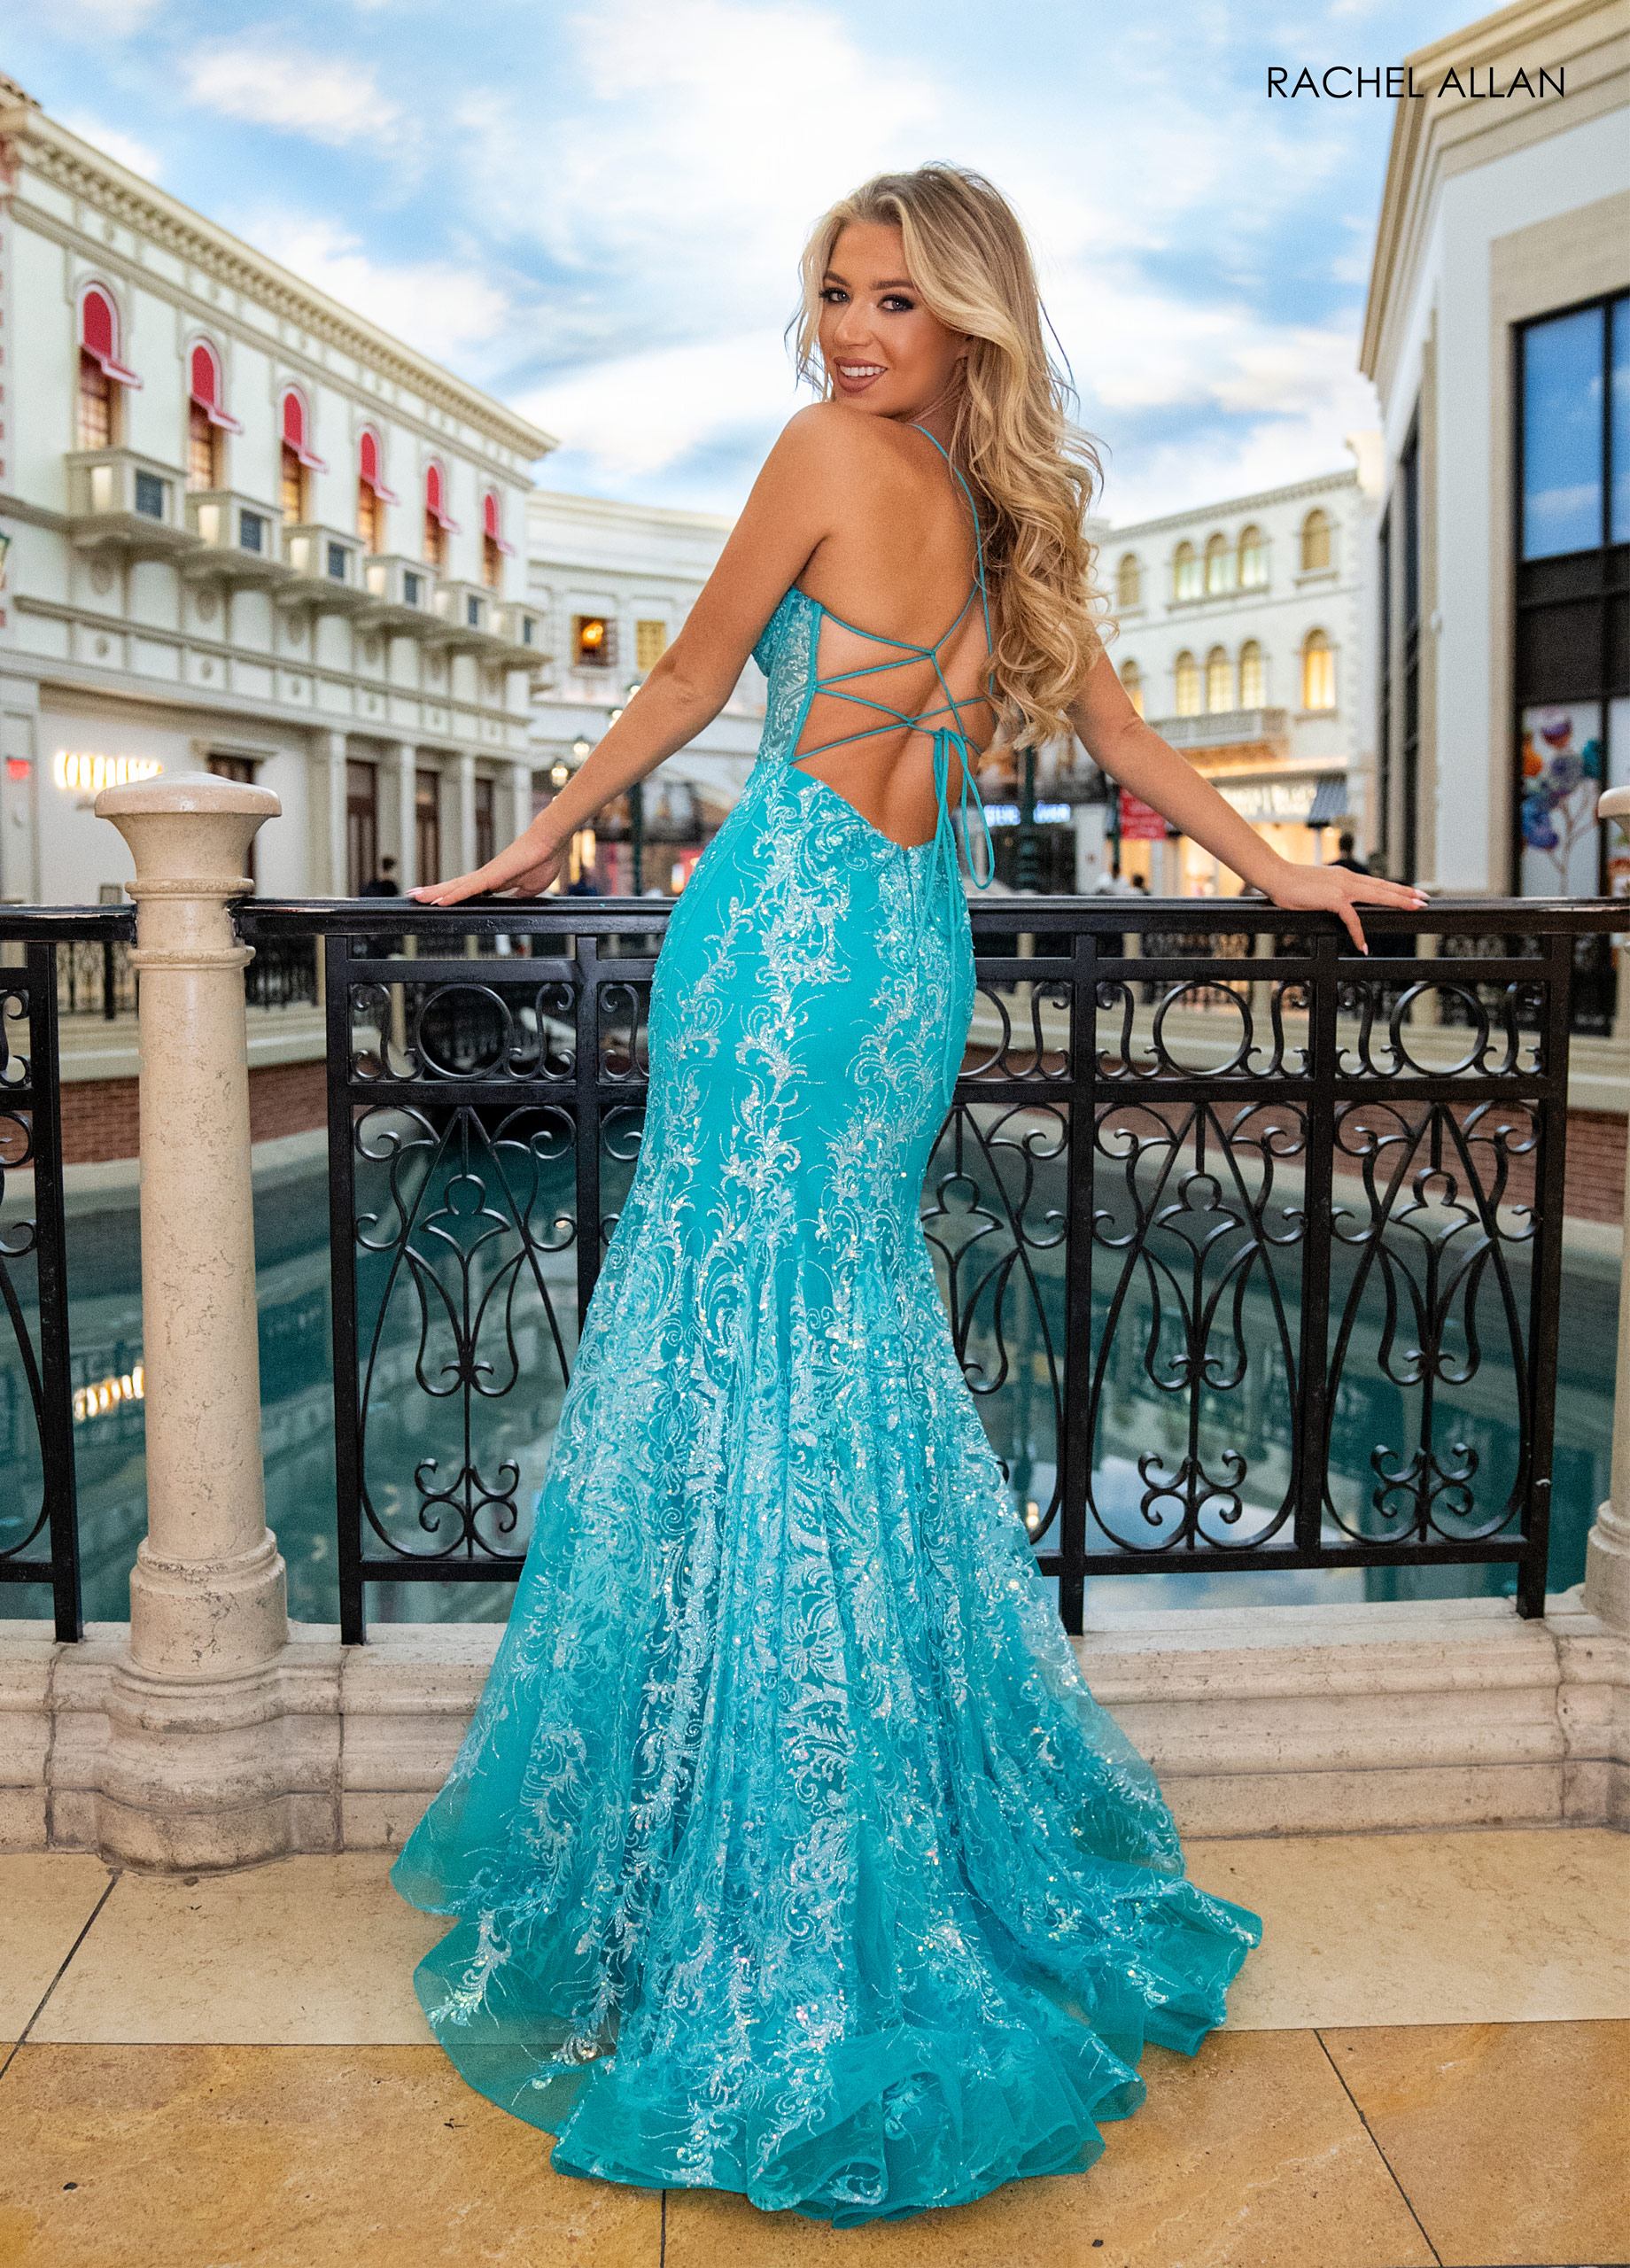 Plunging Fit & Flare Prom Dresses in Color | Style - 70491